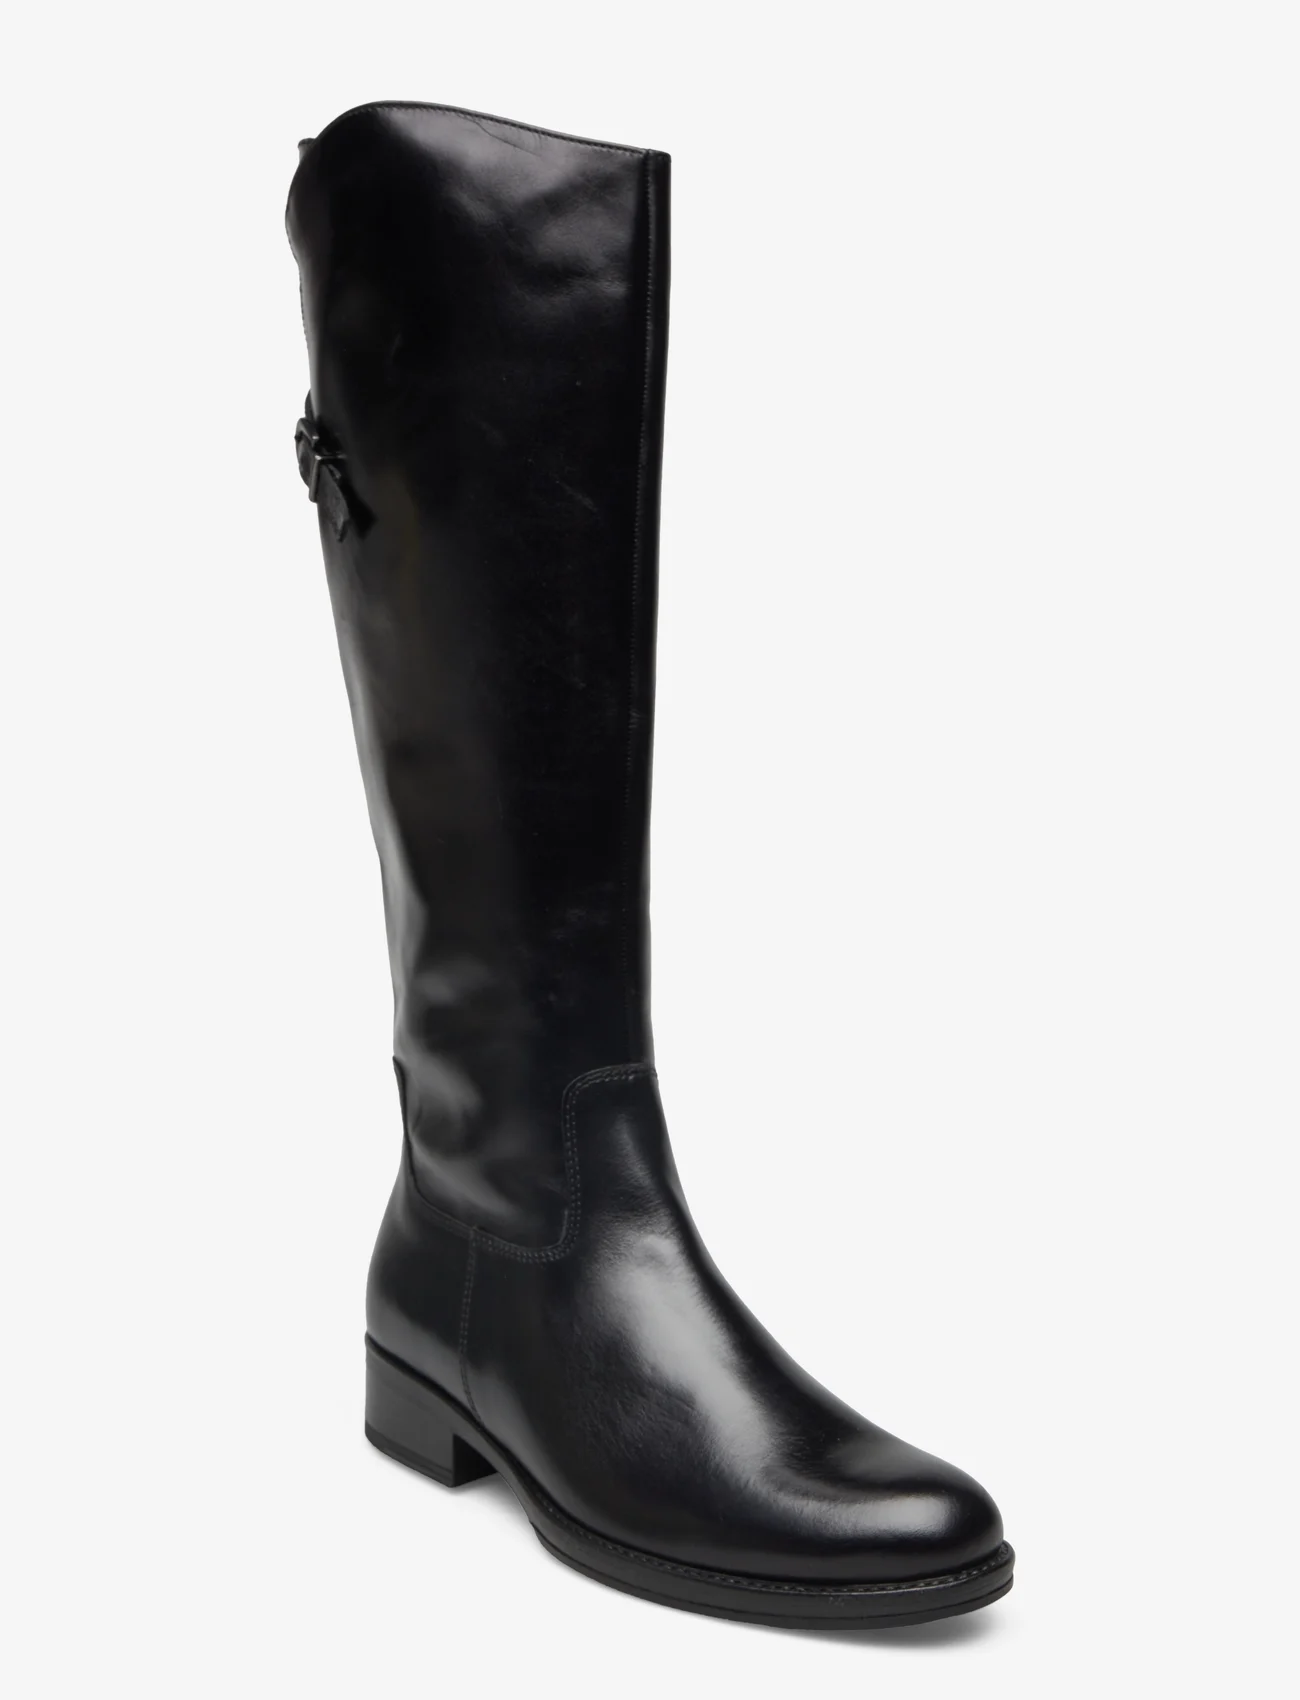 Gabor - Boot - knee high boots - black - 0